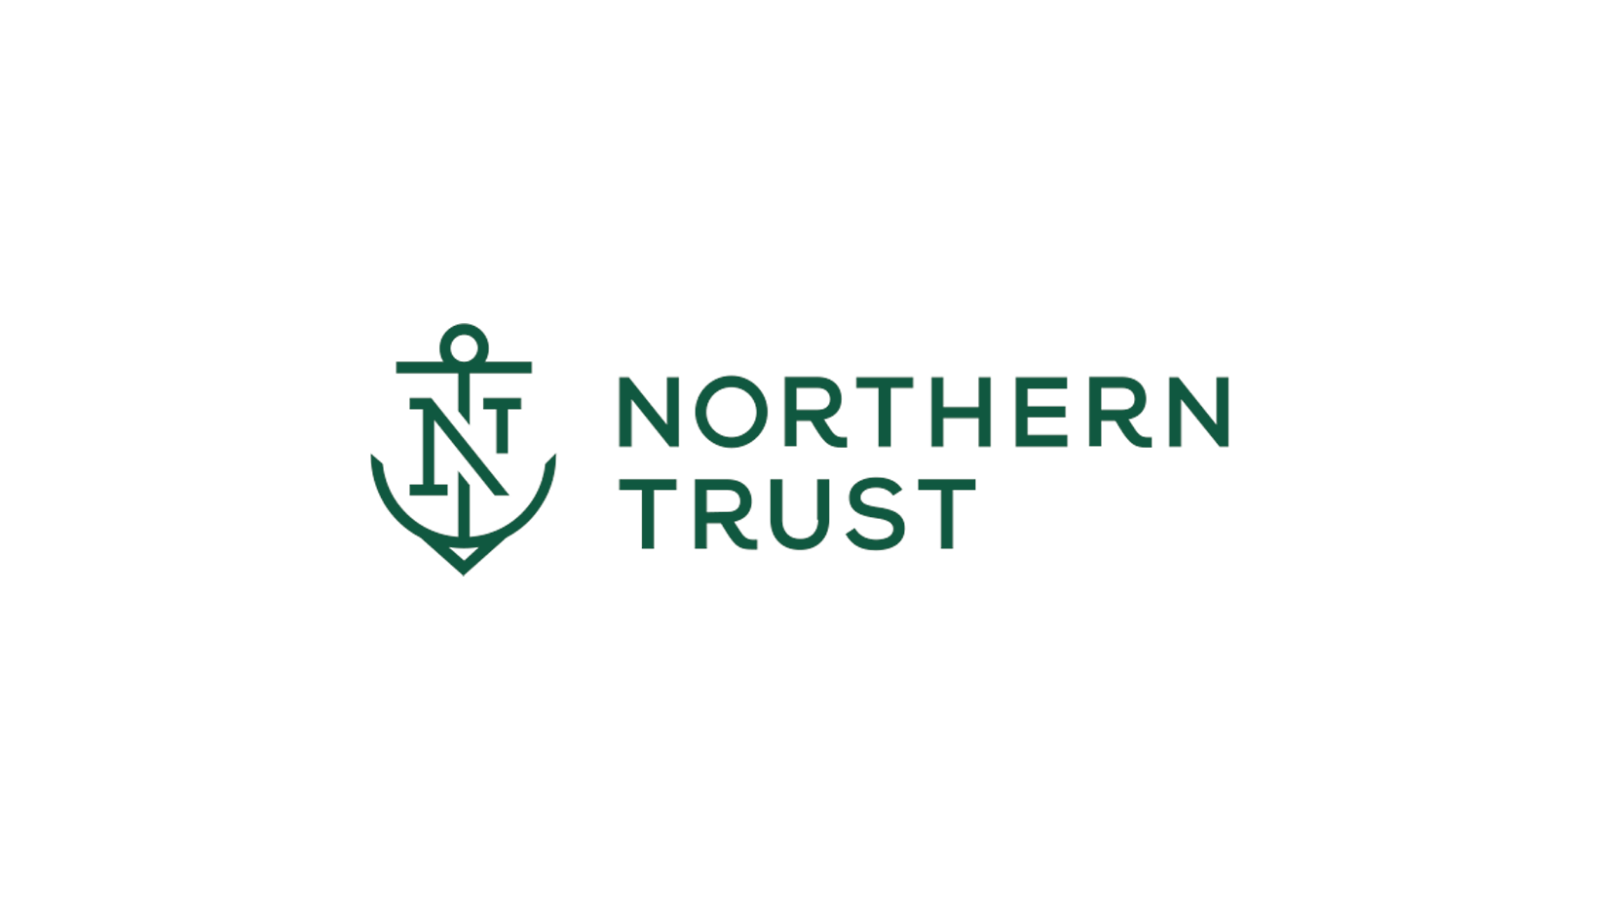 Northern Trust Creates Digital Assets and Financial Markets Group